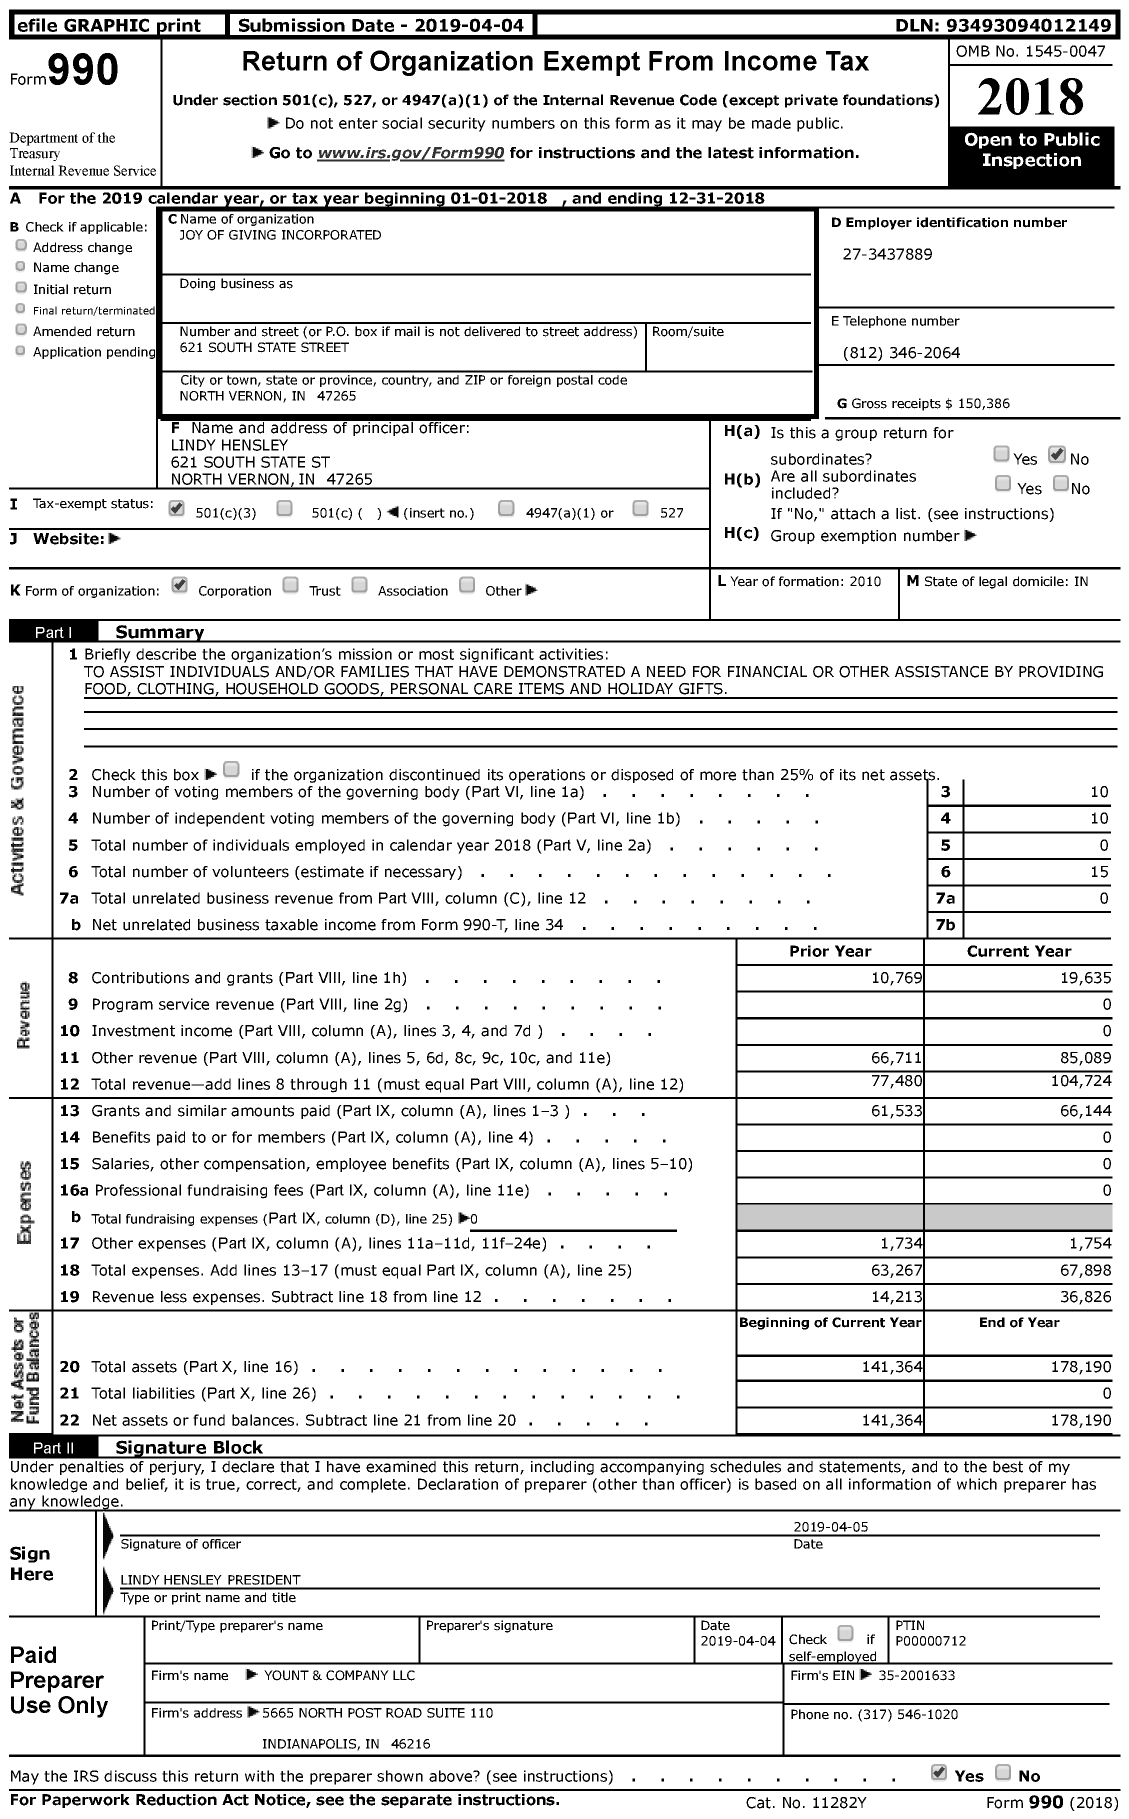 Image of first page of 2018 Form 990 for Joy of Giving Incorporated